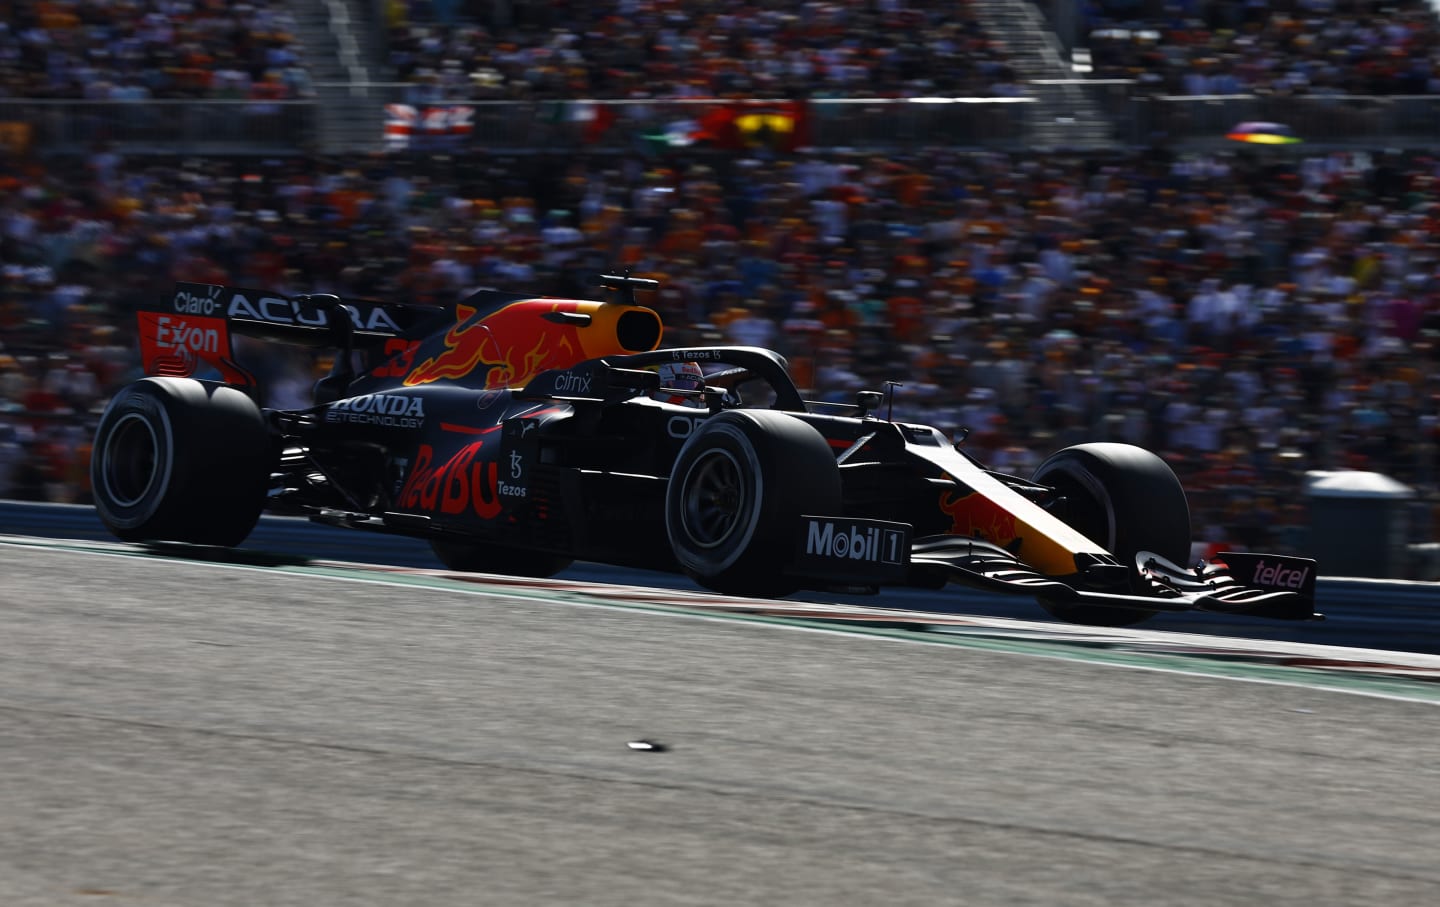 AUSTIN, TEXAS - OCTOBER 24: Max Verstappen of the Netherlands driving the (33) Red Bull Racing